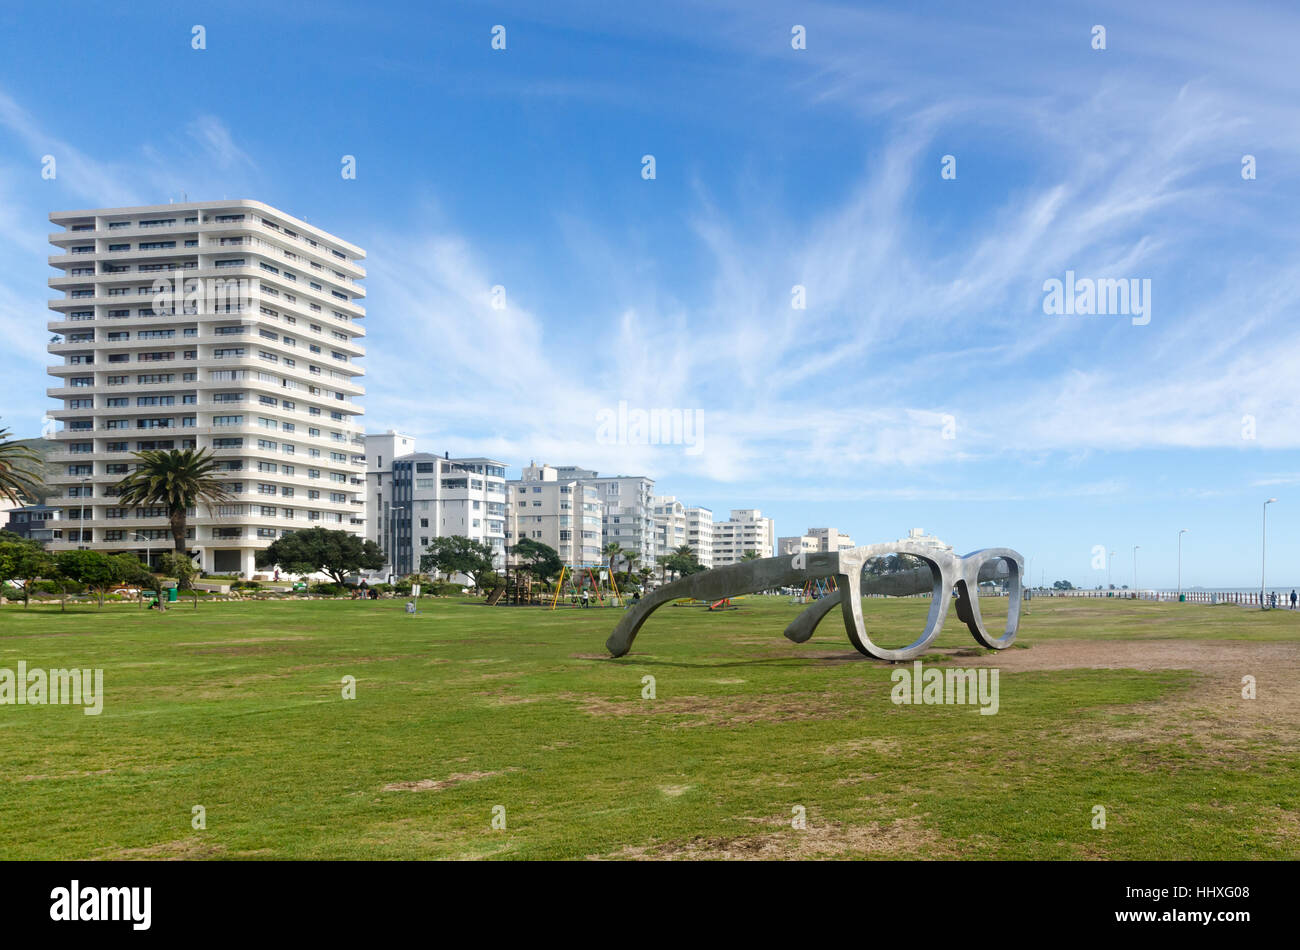 'Perceiving Freedom' art installation by artist Michael Elion, at Sea Point promenade, Cape Town, South Africa Stock Photo